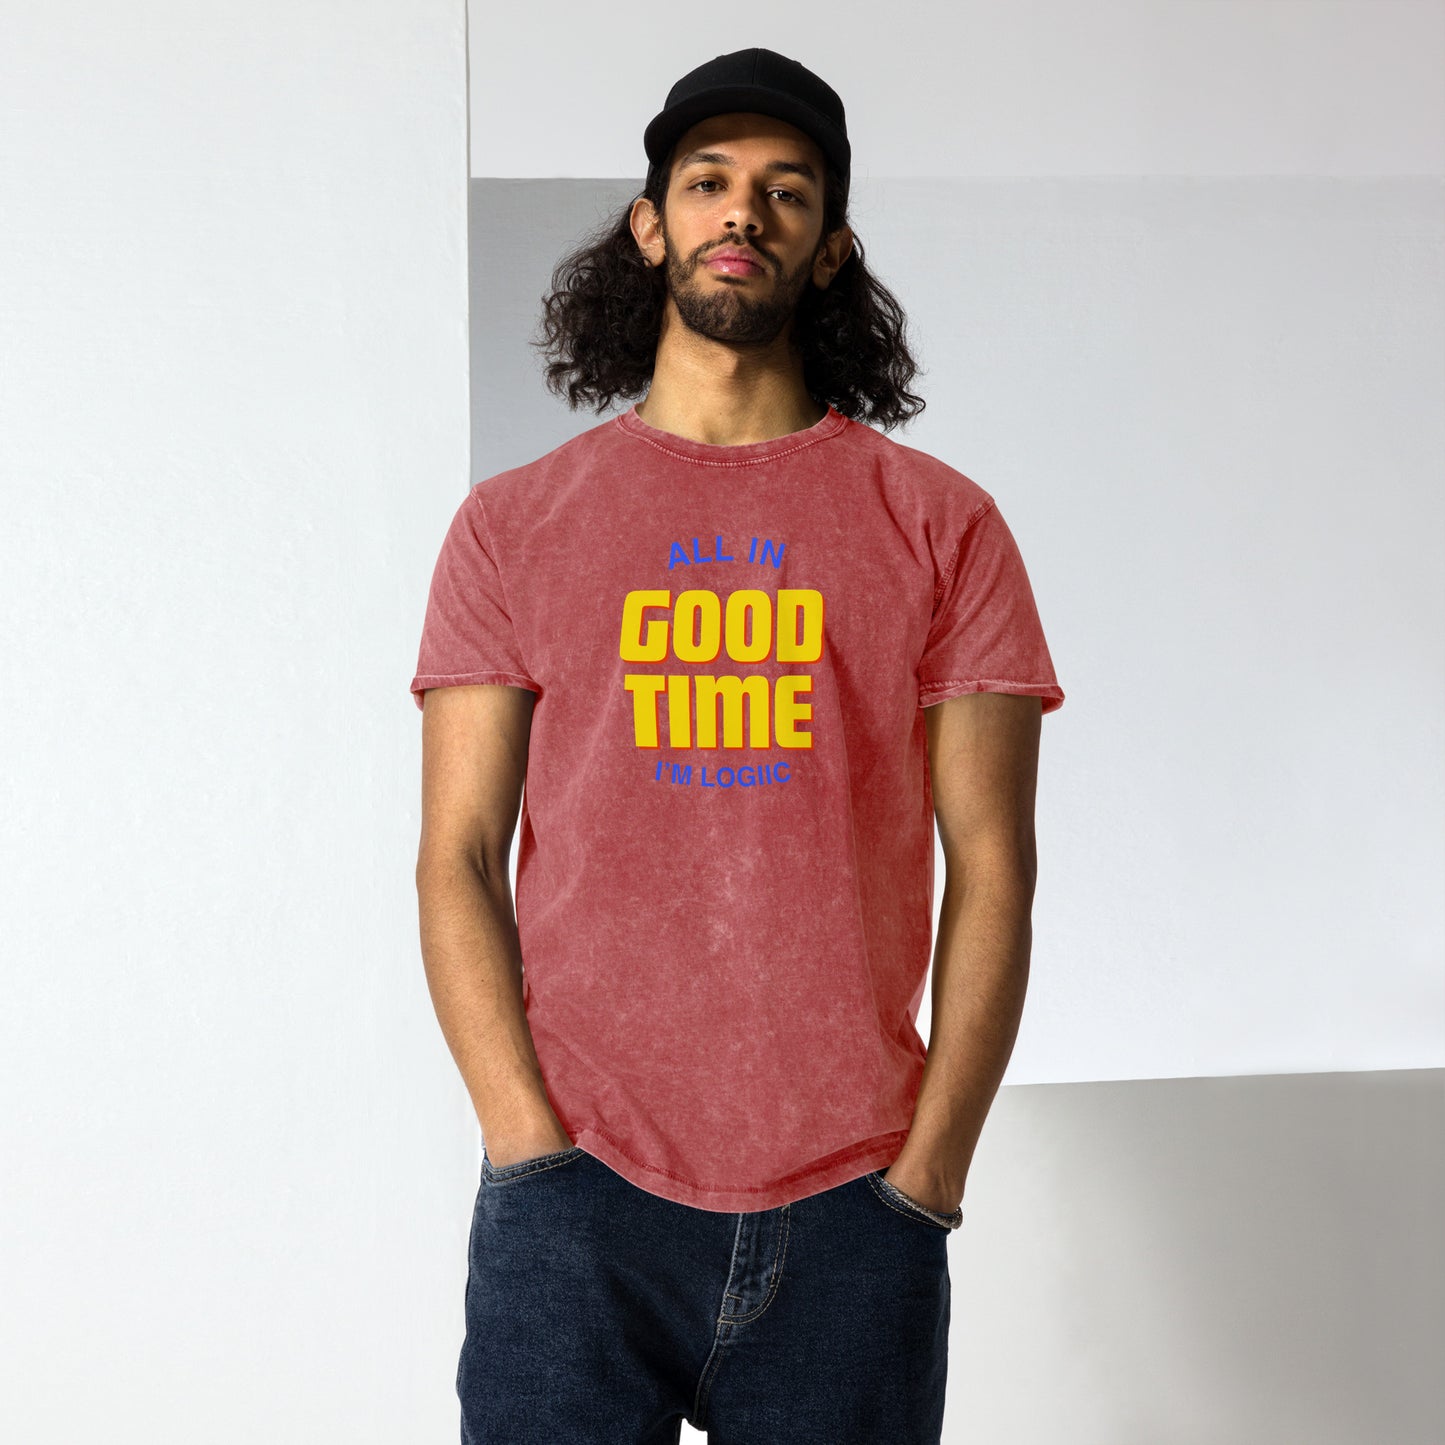 All in Good Time Denim T-Shirt